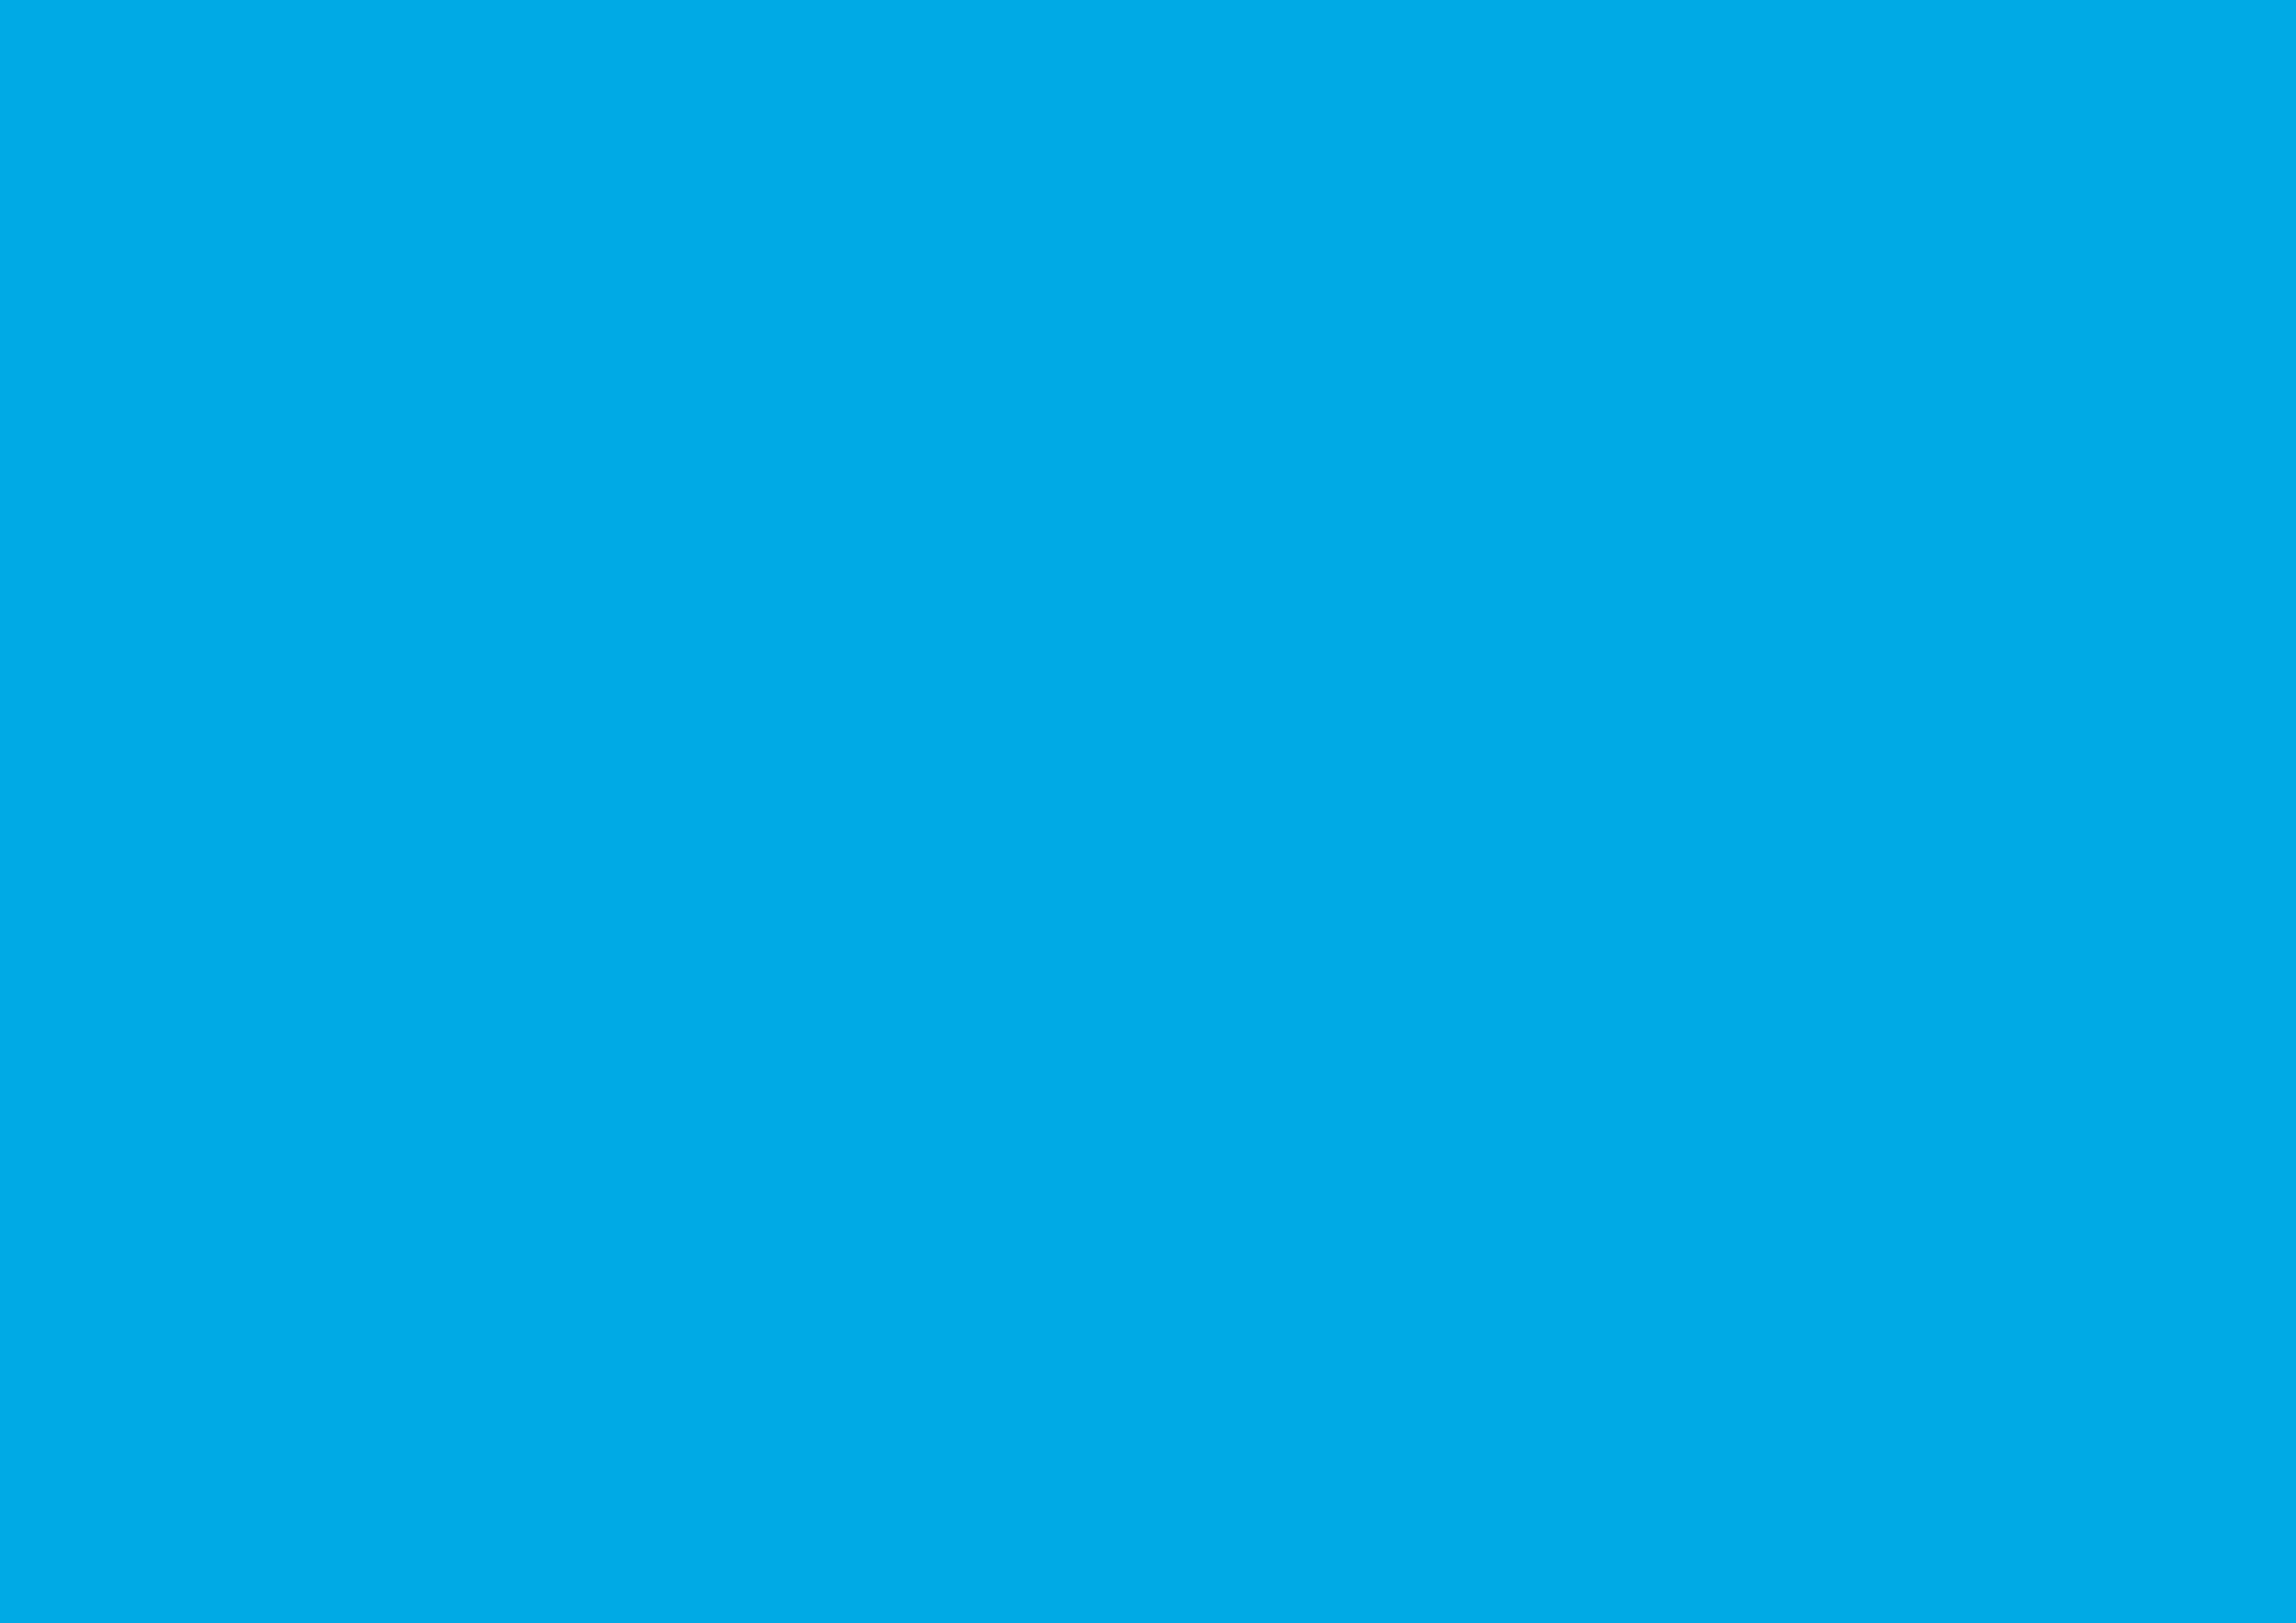 3508x2480 Spanish Sky Blue Solid Color Background